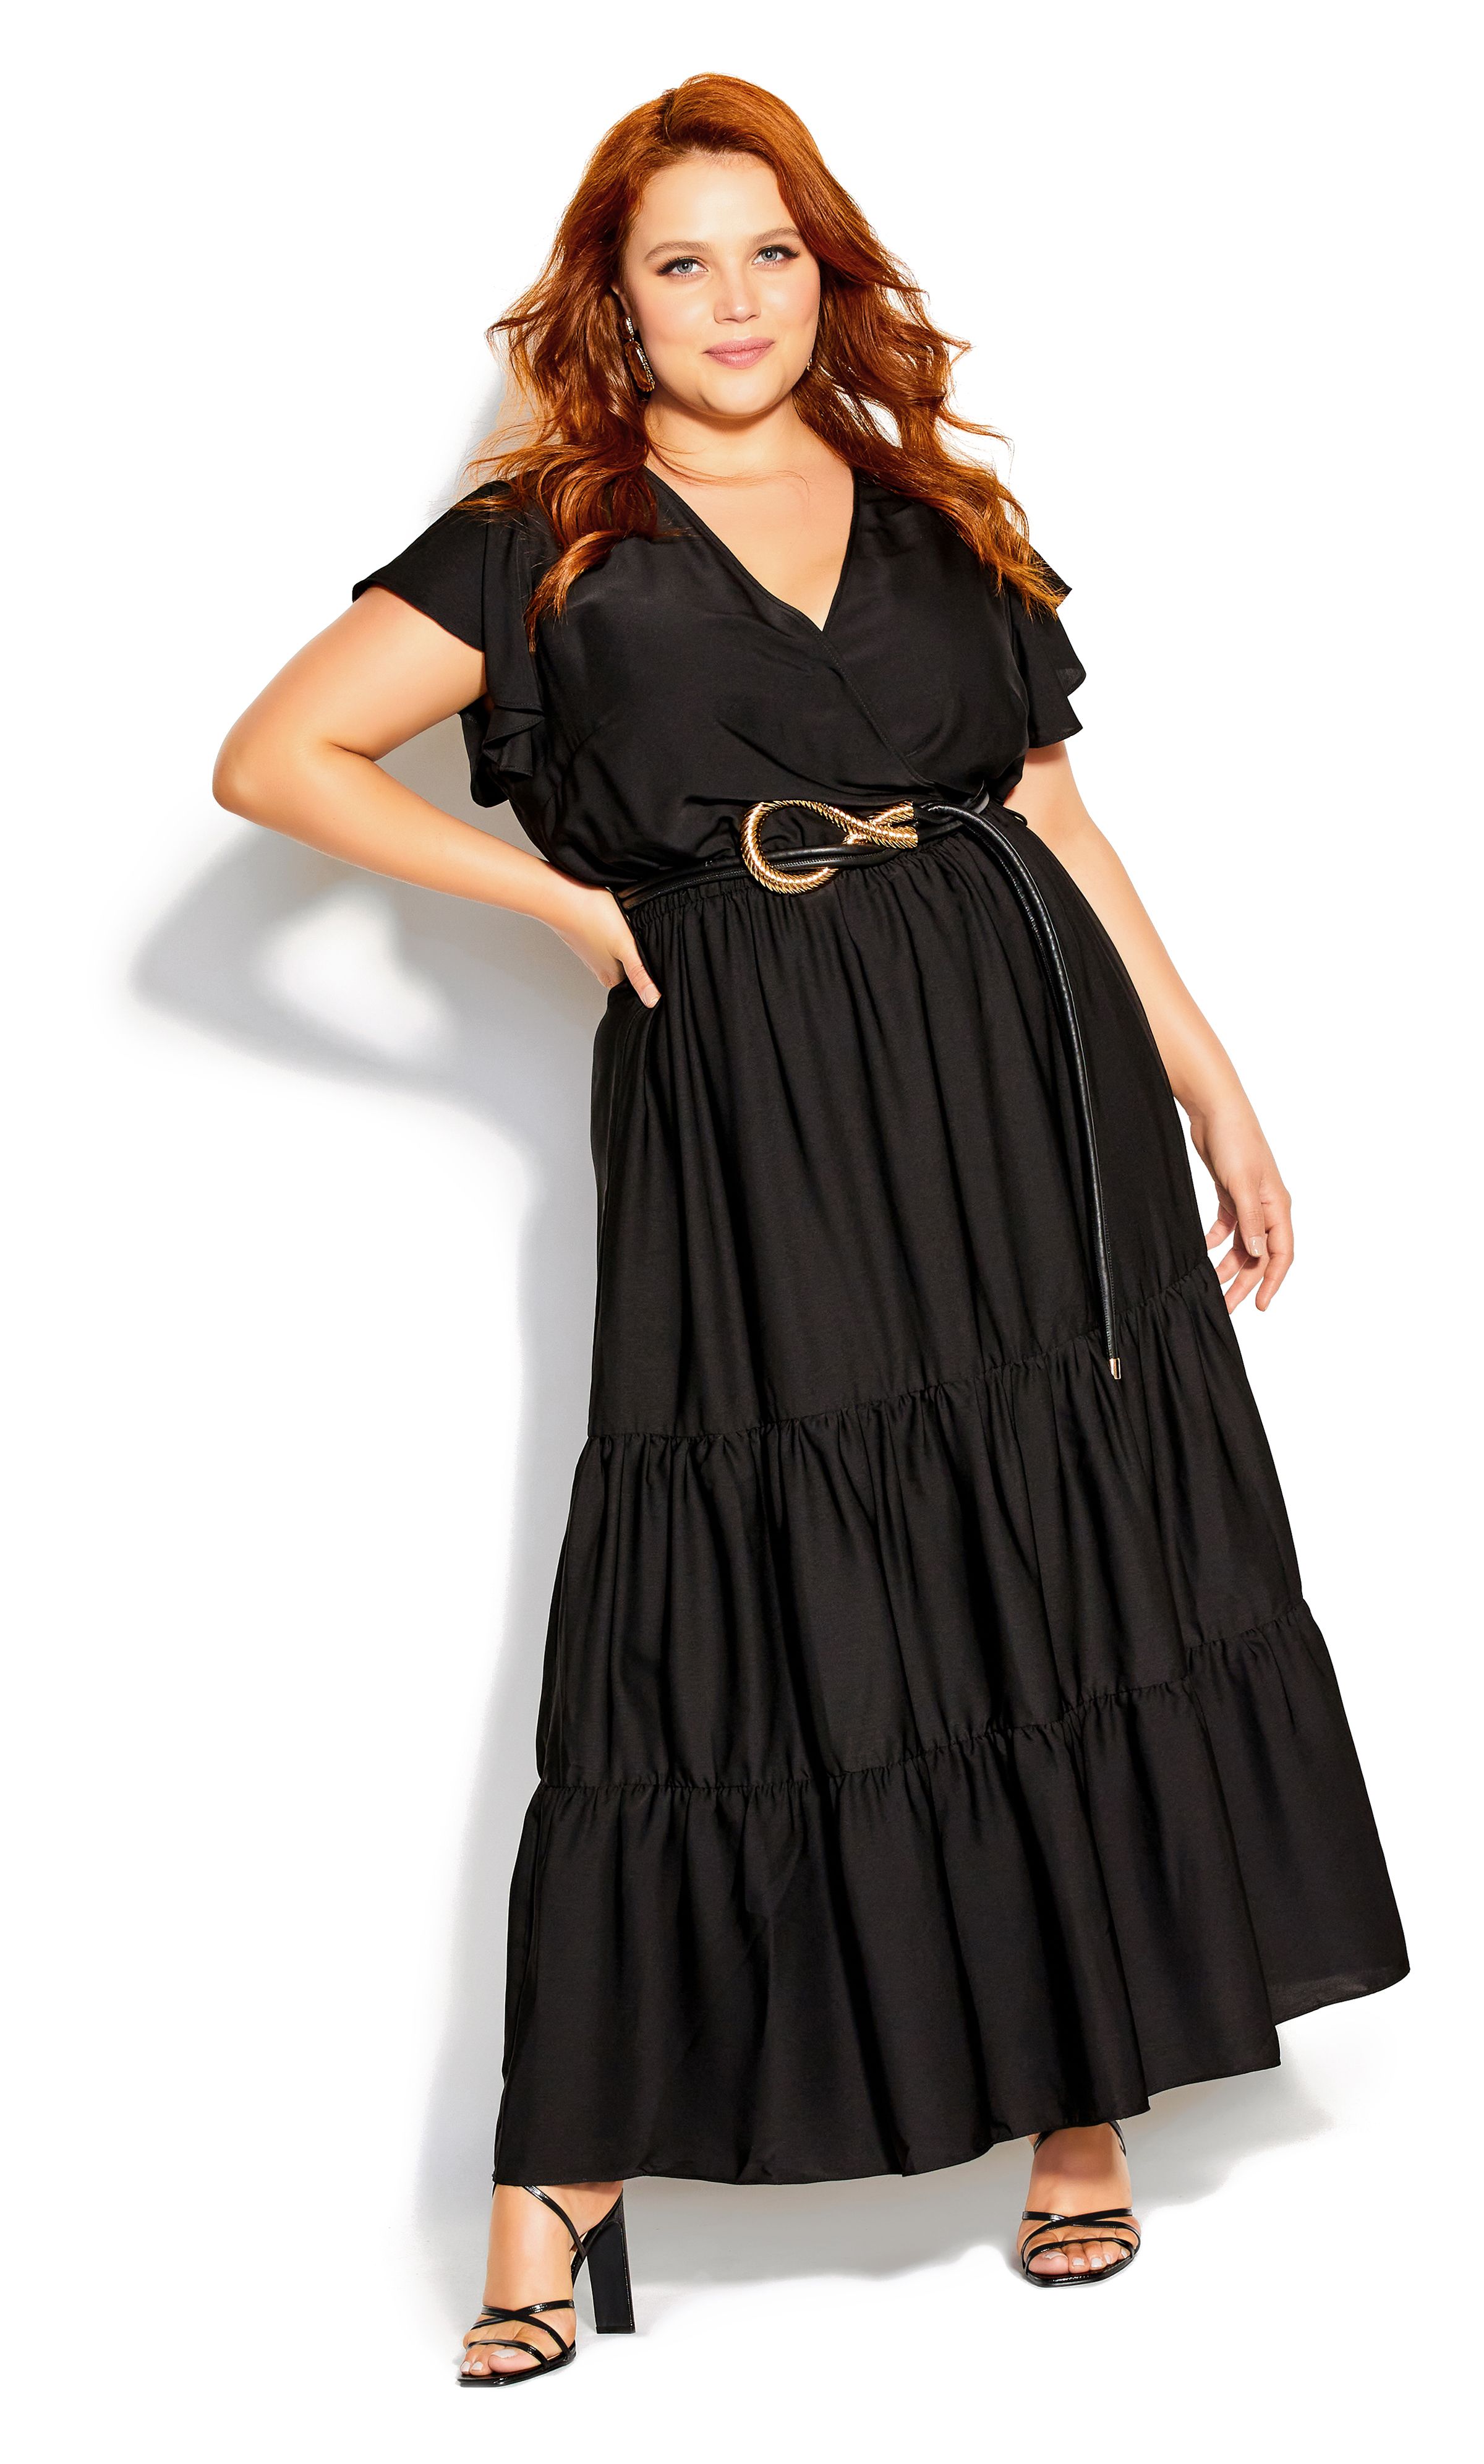 Float into the new season with the Flutter Away Maxi Dress, boasting a feminine silhouette and ruffle tiered skirt. Finished in a flattering faux wrap neckline and elegant tie waist, this draping maxi dress is one graceful ensemble. Key Features Include: - V-neckline - Frilled short sleeves - Elasticated waistband - Removable self-tie waist belt - Faux wrap style - Tiered skirt - Pullover style - Unlined - Maxi length